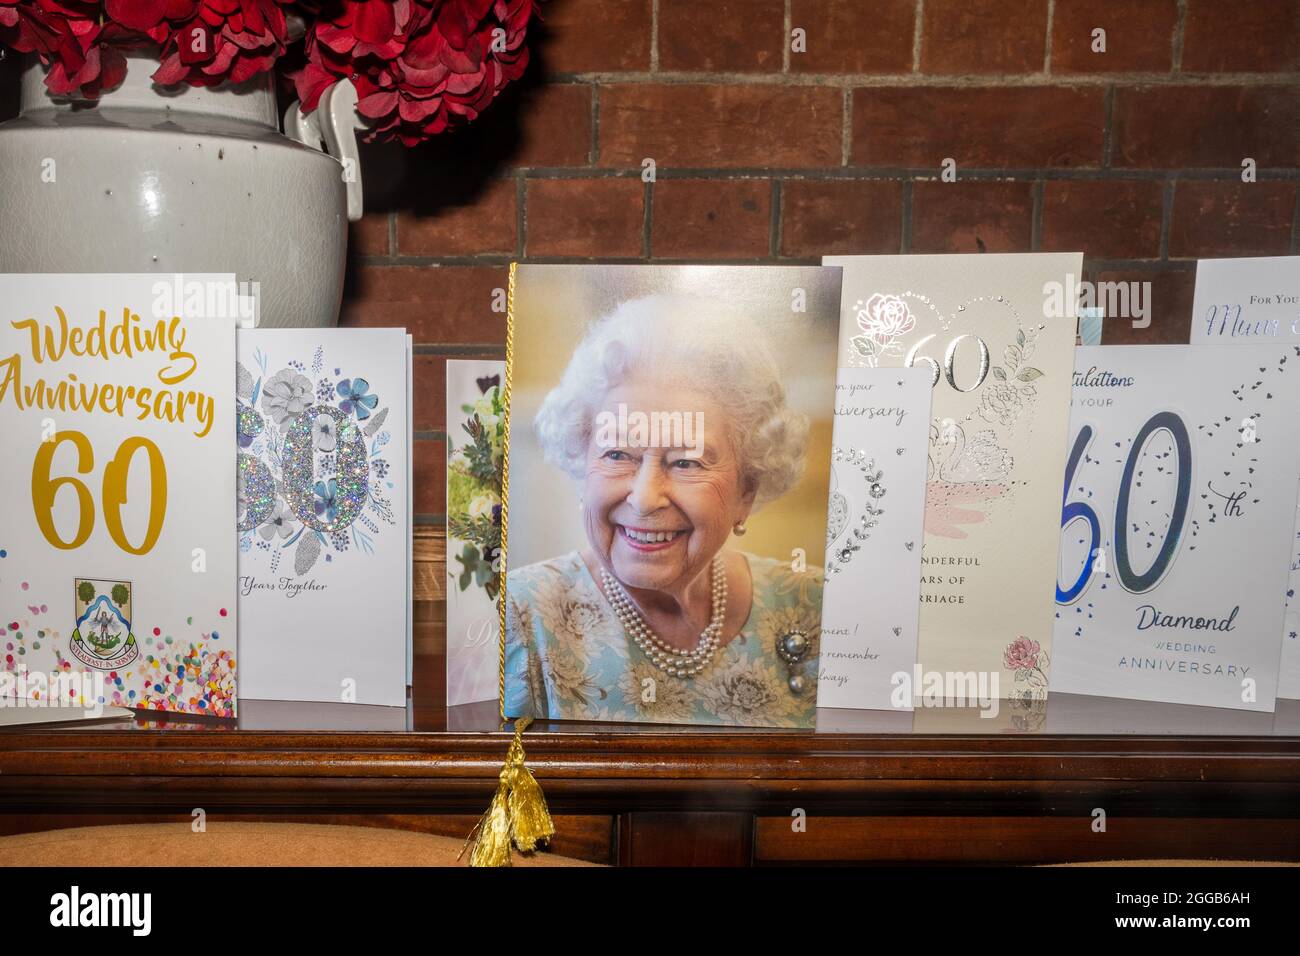 Display of 60th or Diamond wedding anniversary cards including a card from the Queen, UK Stock Photo